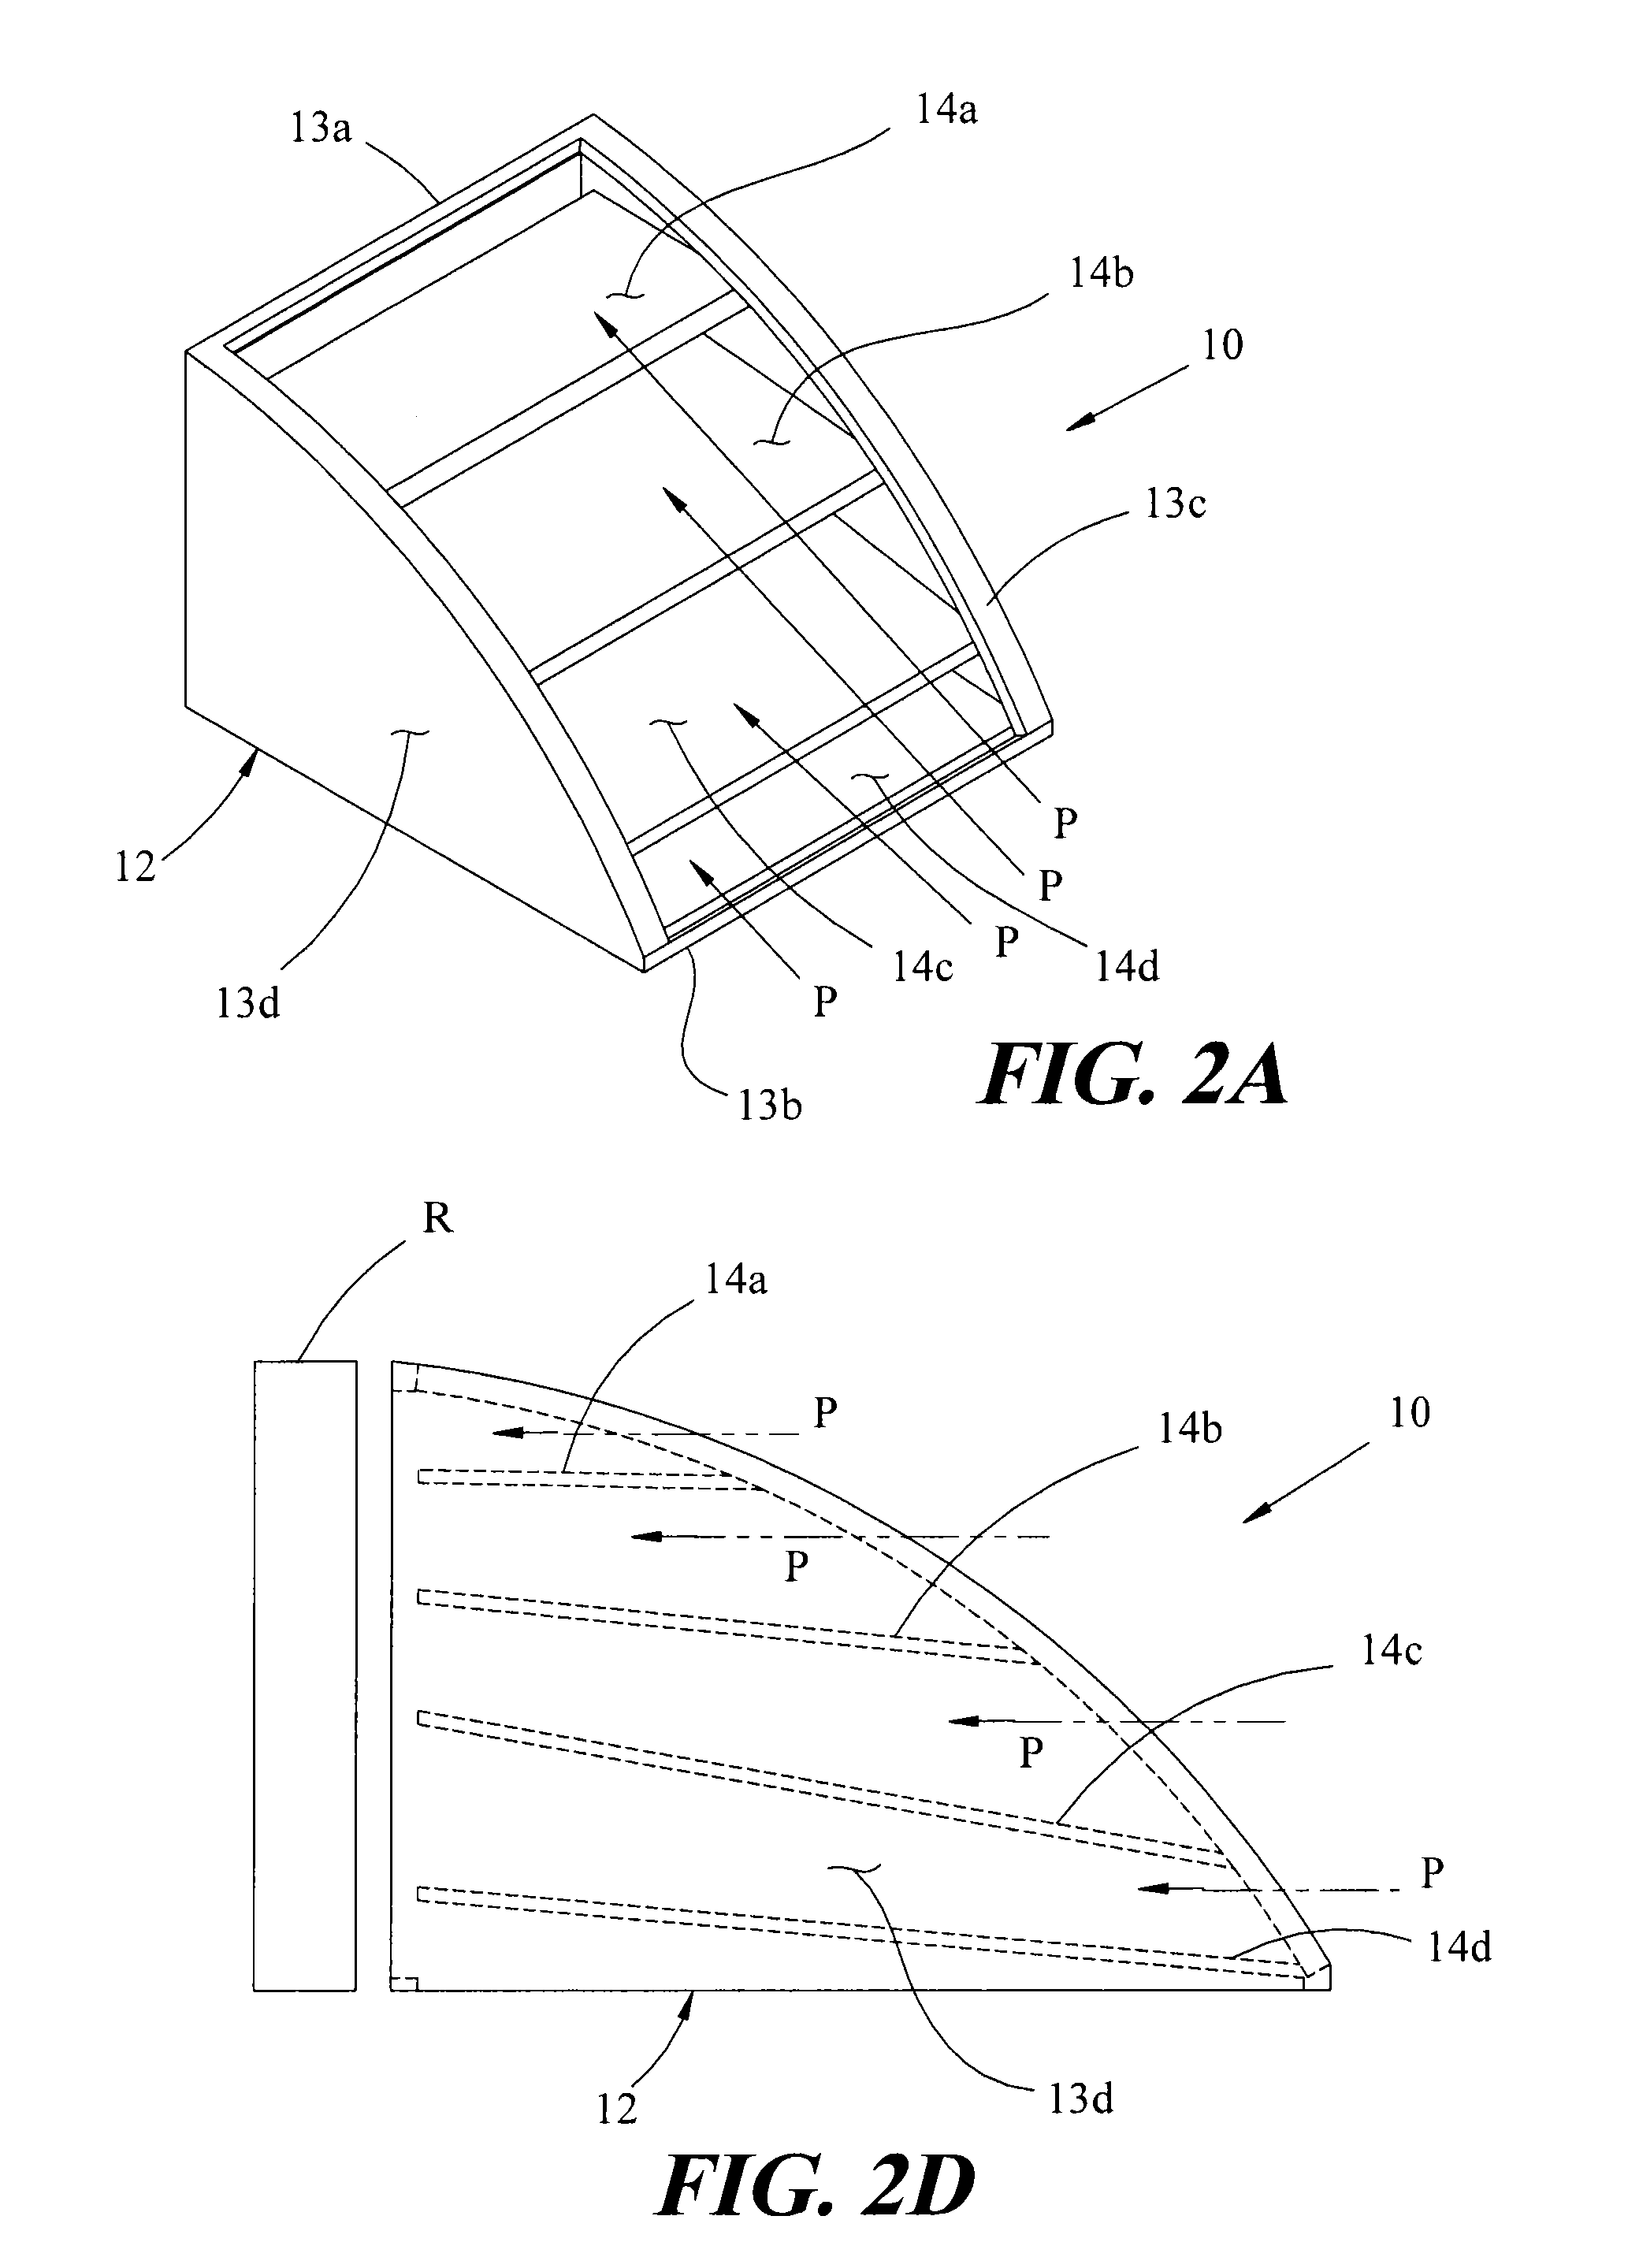 Variably Openable Radiator Cowling, Shroud, or Fairing for Over the Road Vehicles and the Like